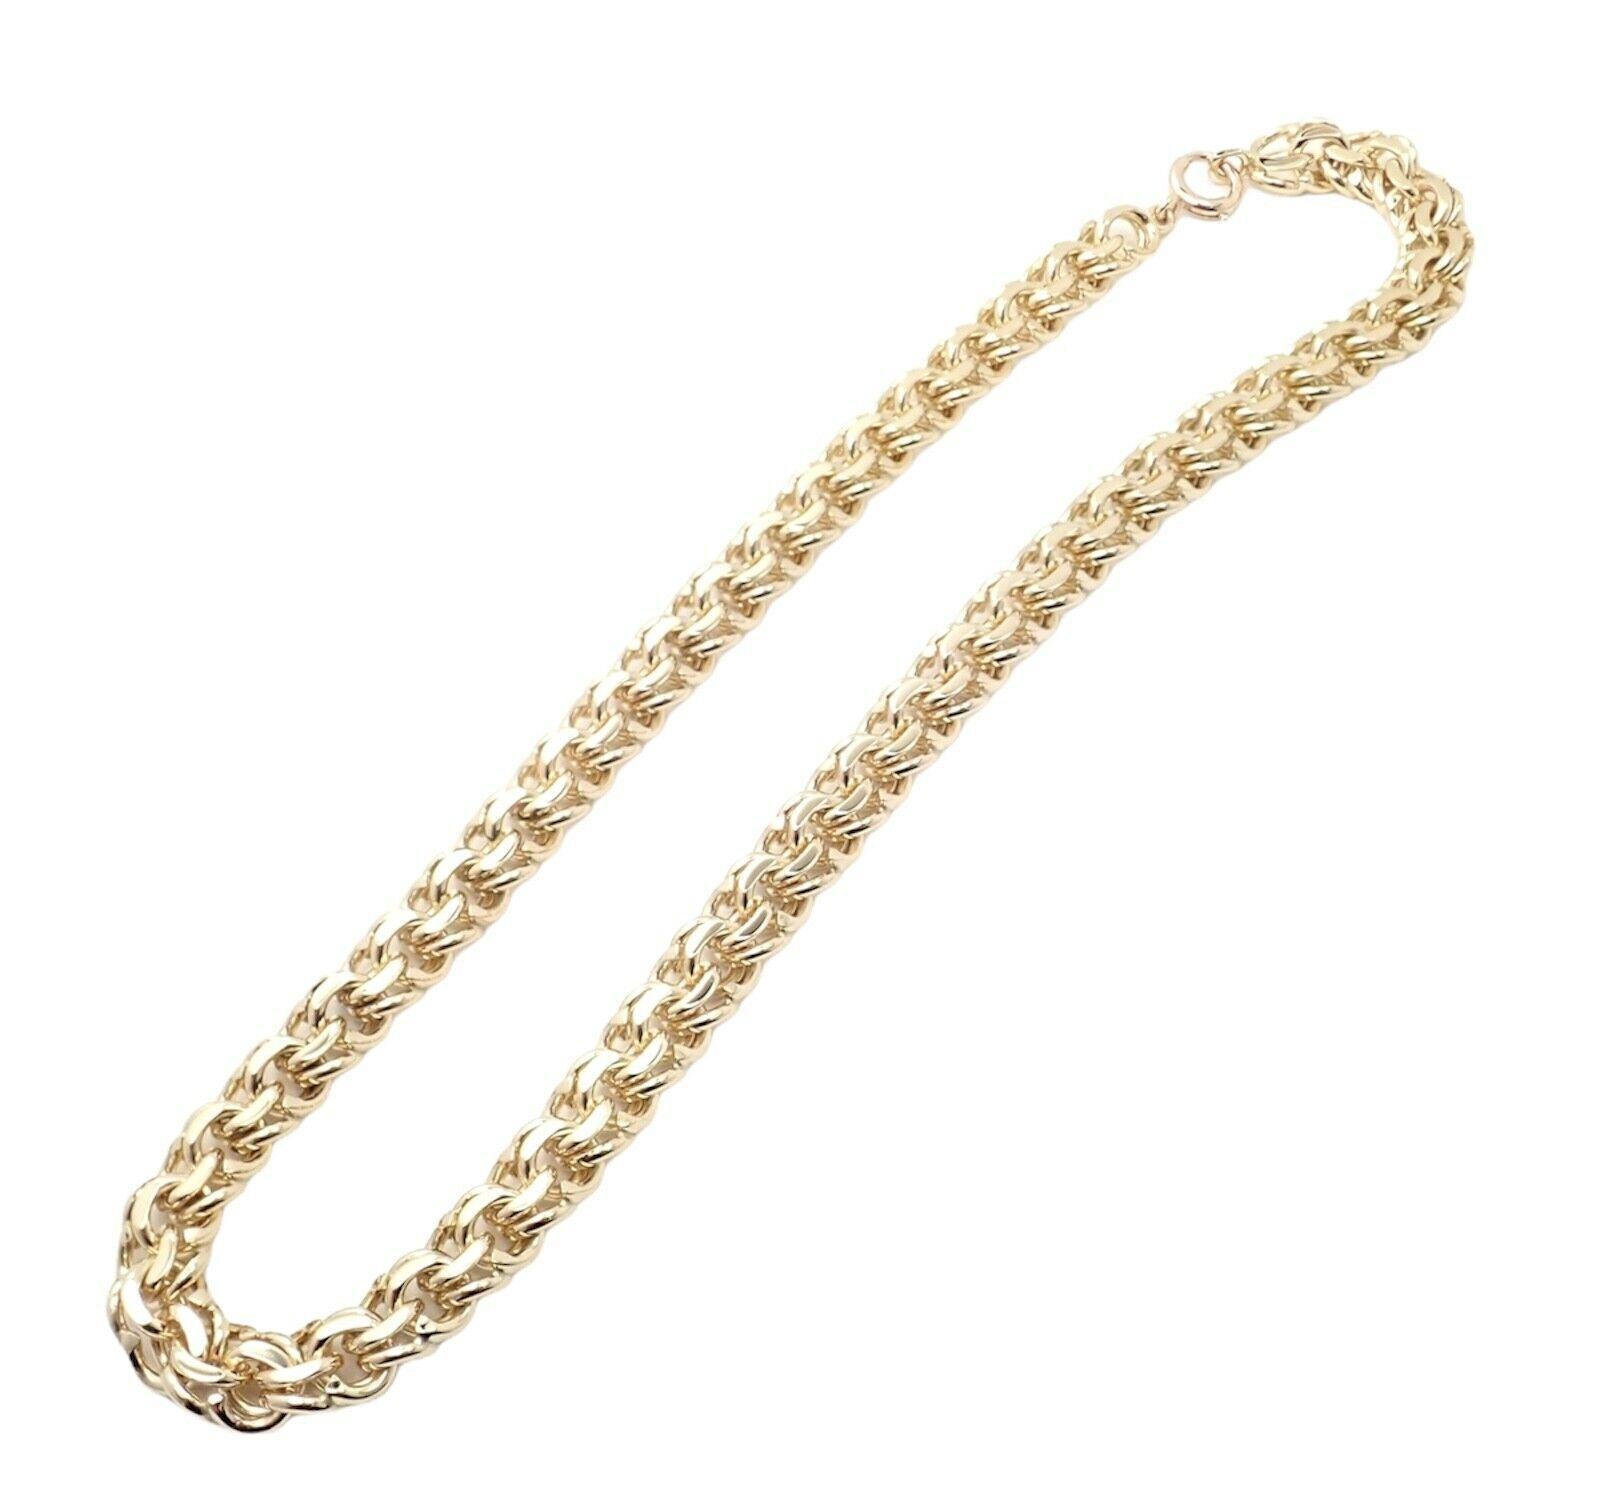 14k Yellow Gold Vintage Link Chain Necklace by Tiffany Co.
Details: 
Length: 16